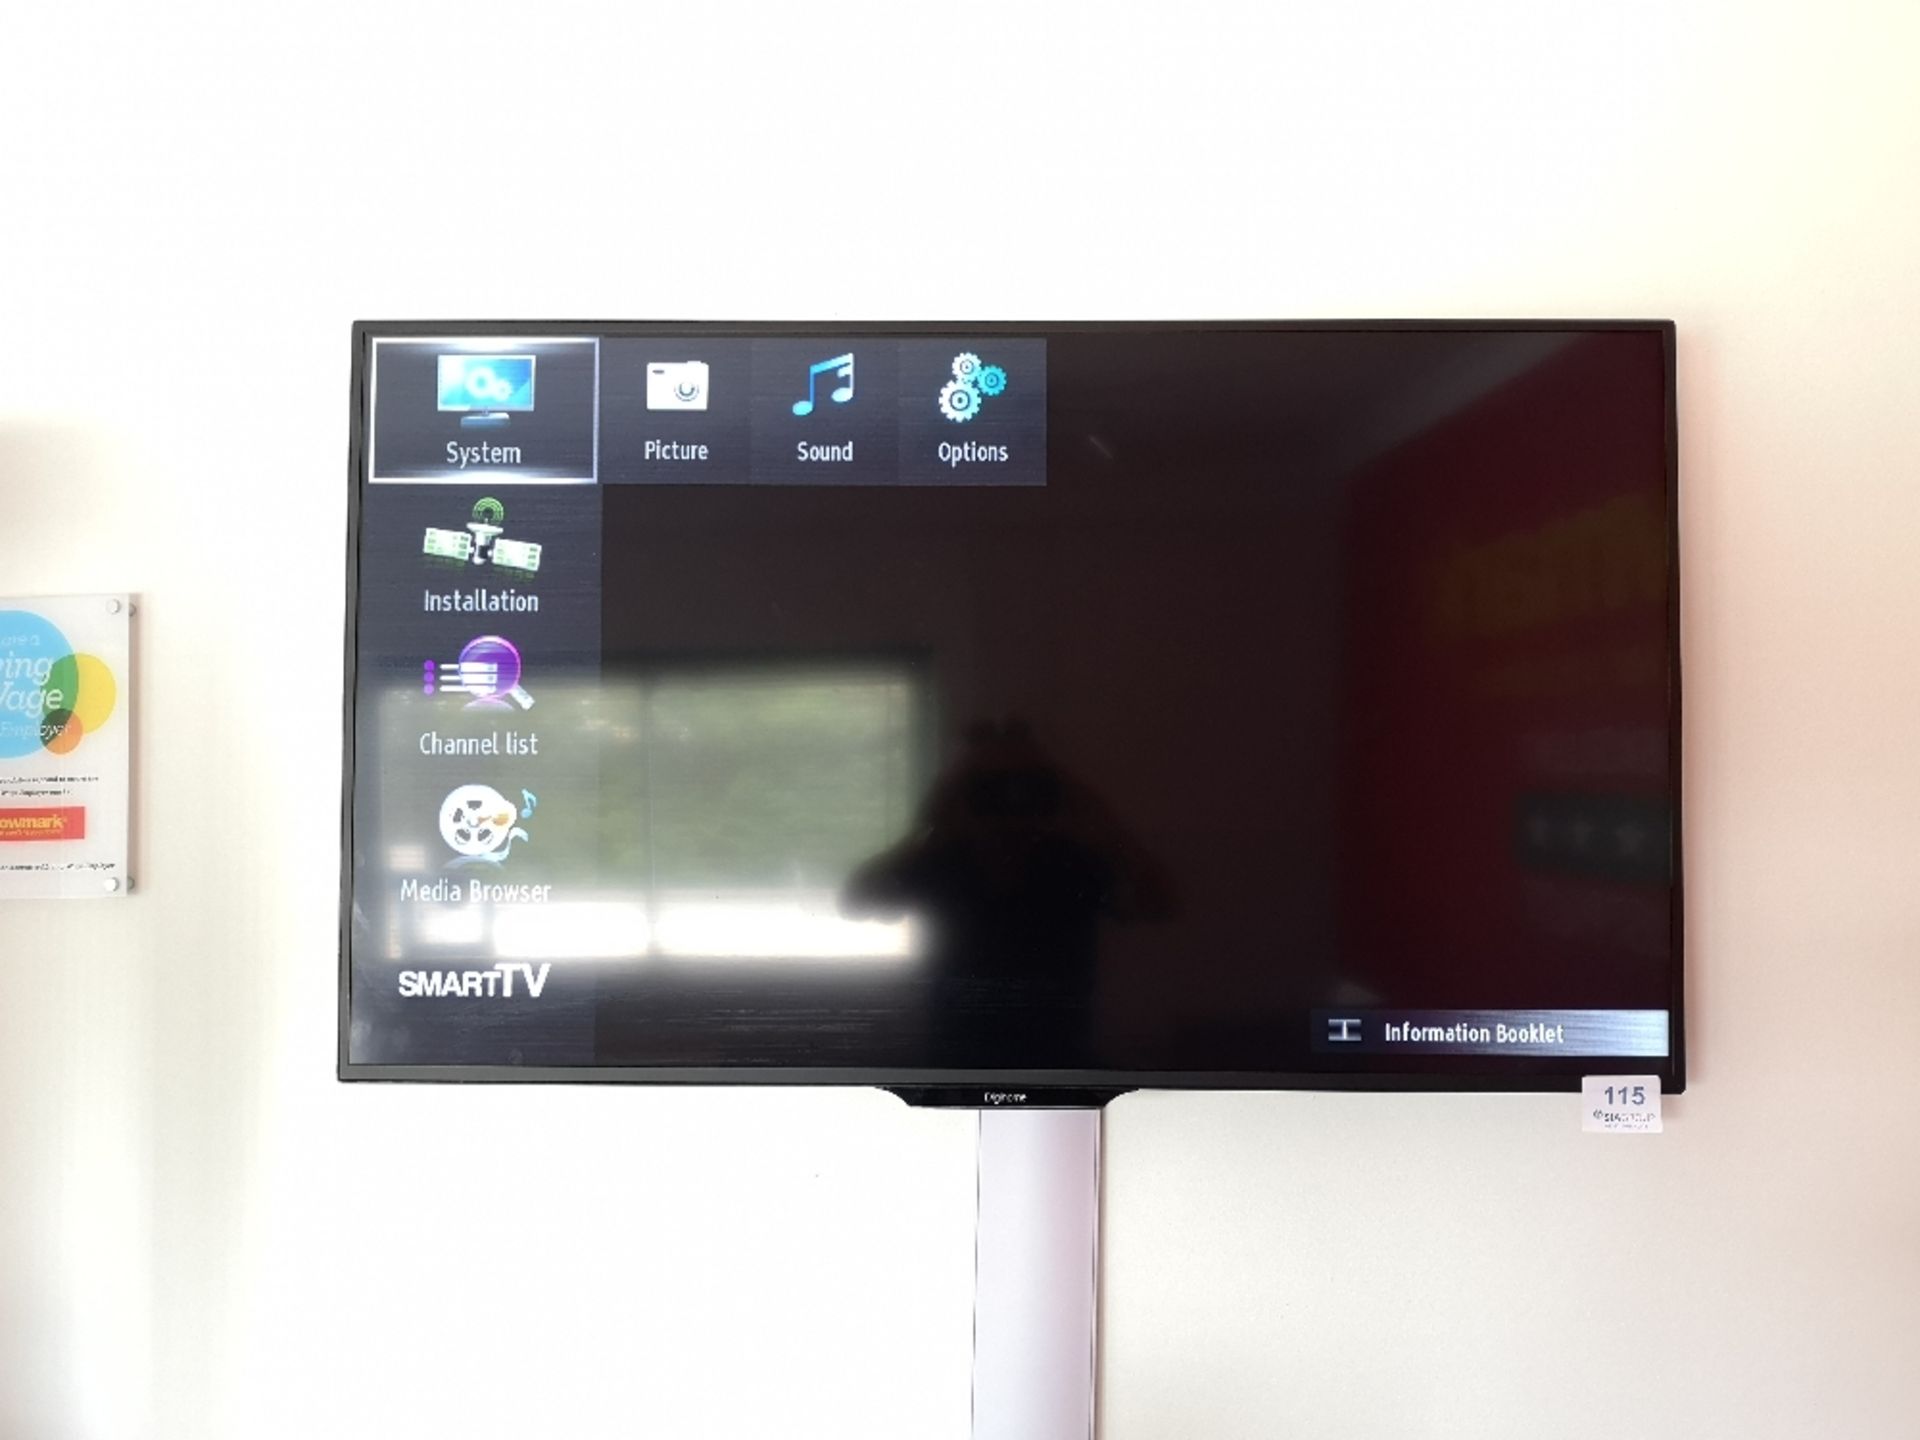 Digihome 50" LED HD Smart TV - Image 2 of 3